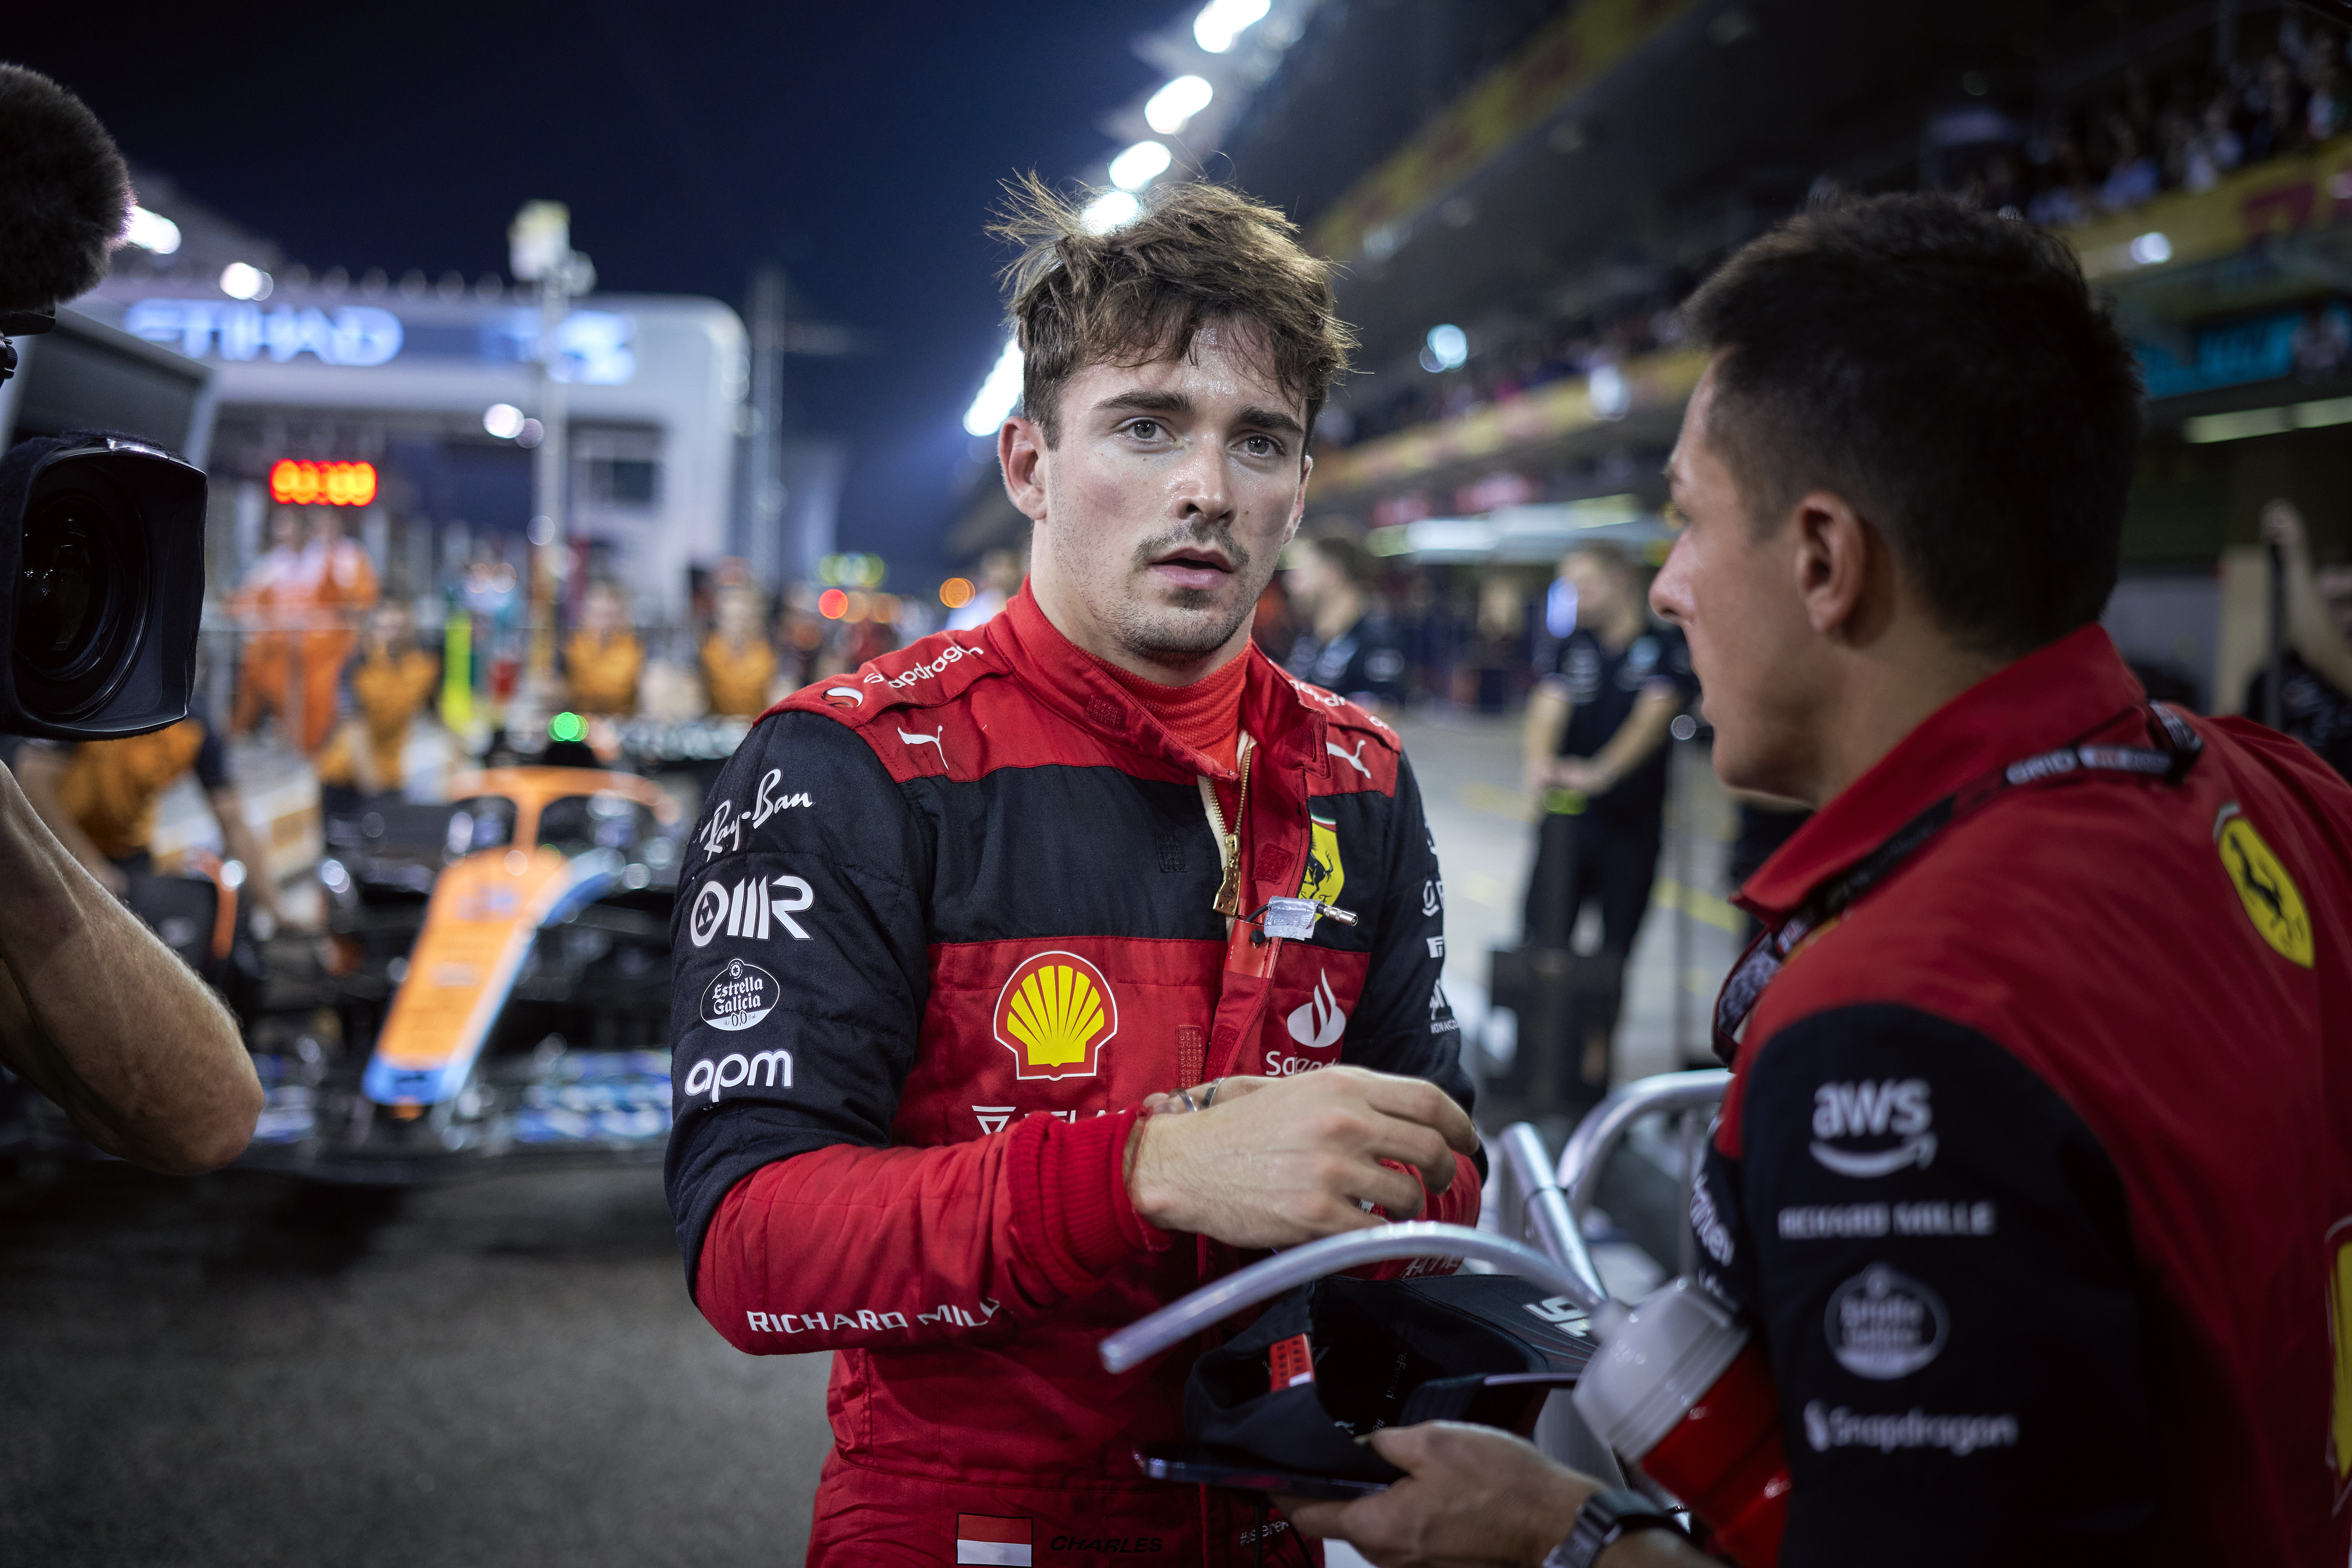 Charles Leclerc at the pits.